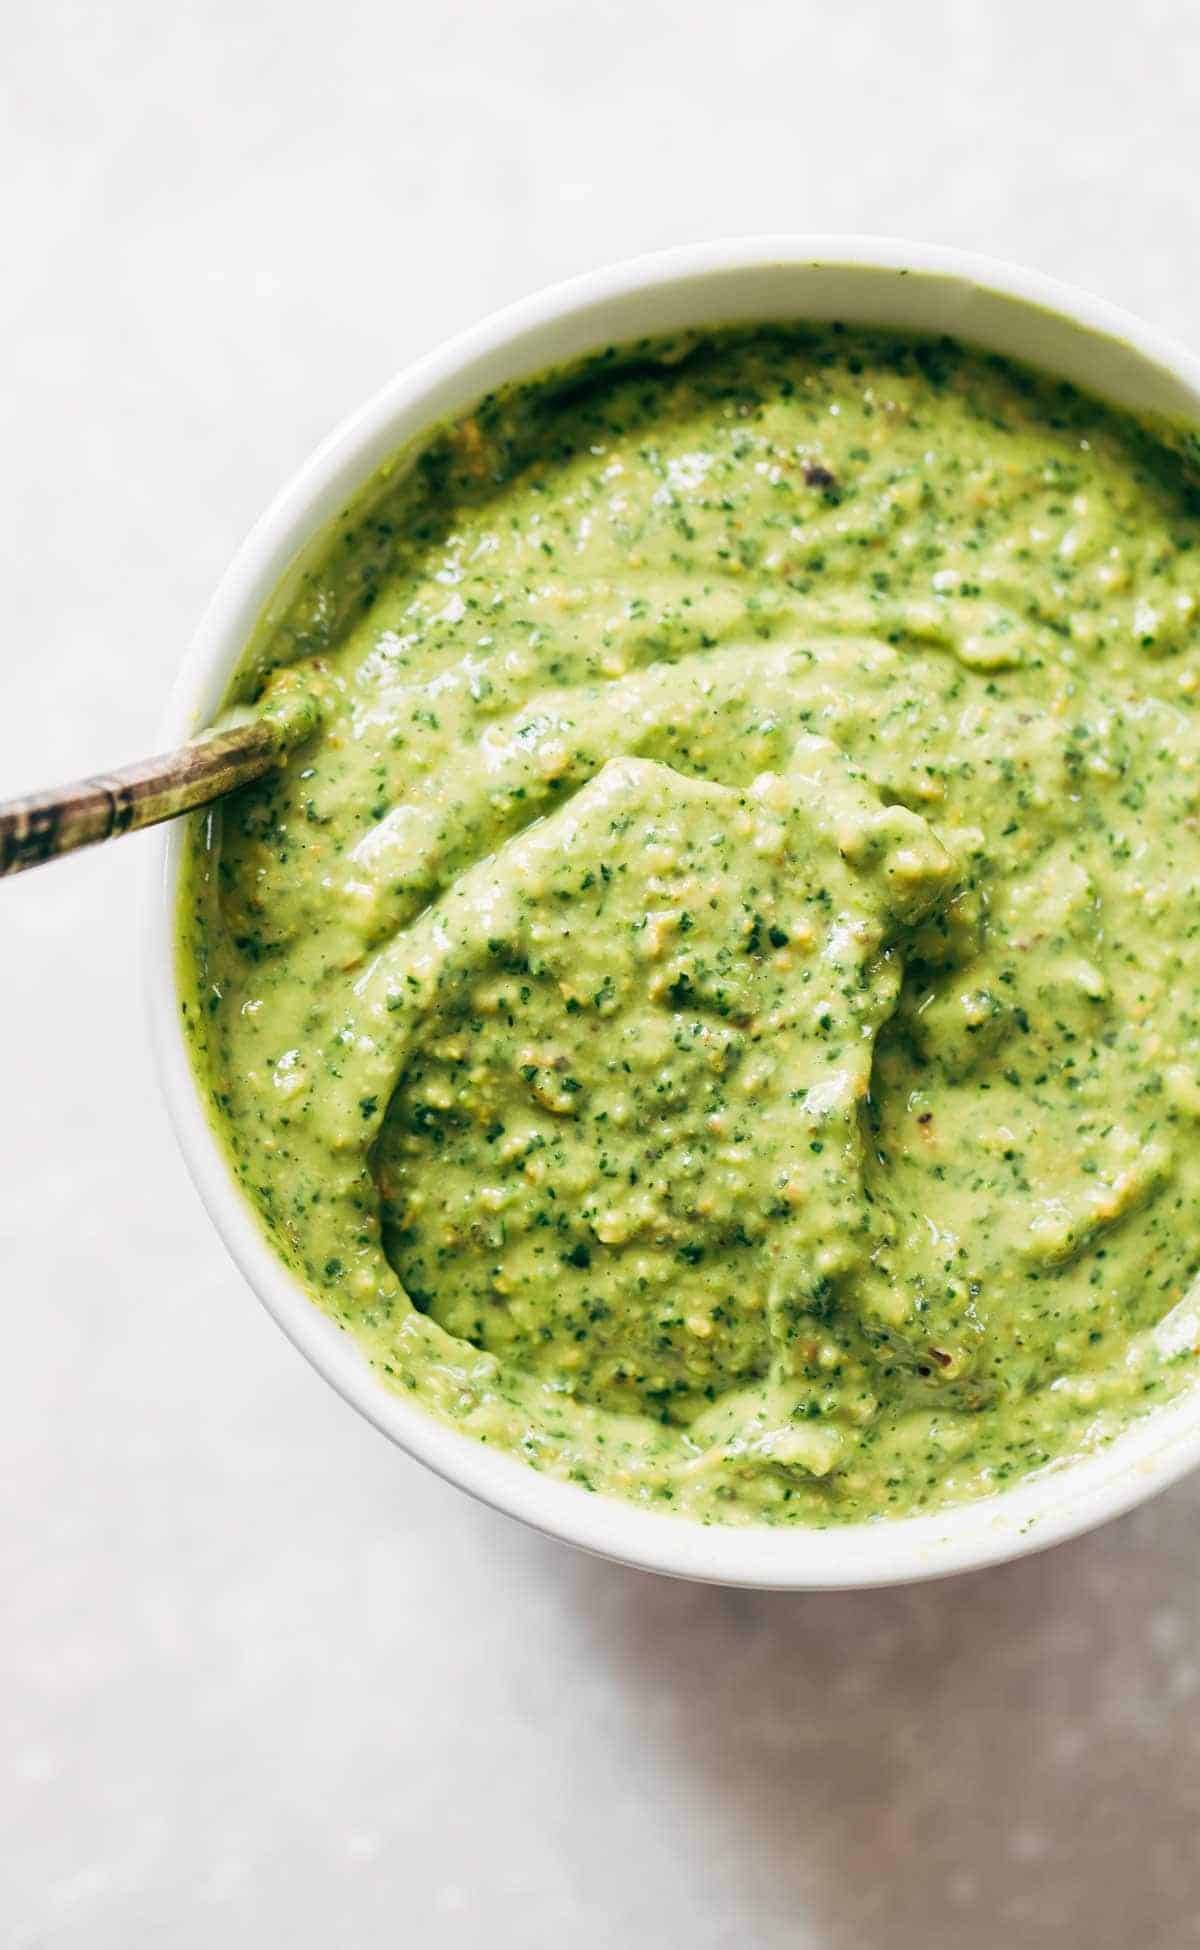 Magic green sauce in a bowl with a spoon.